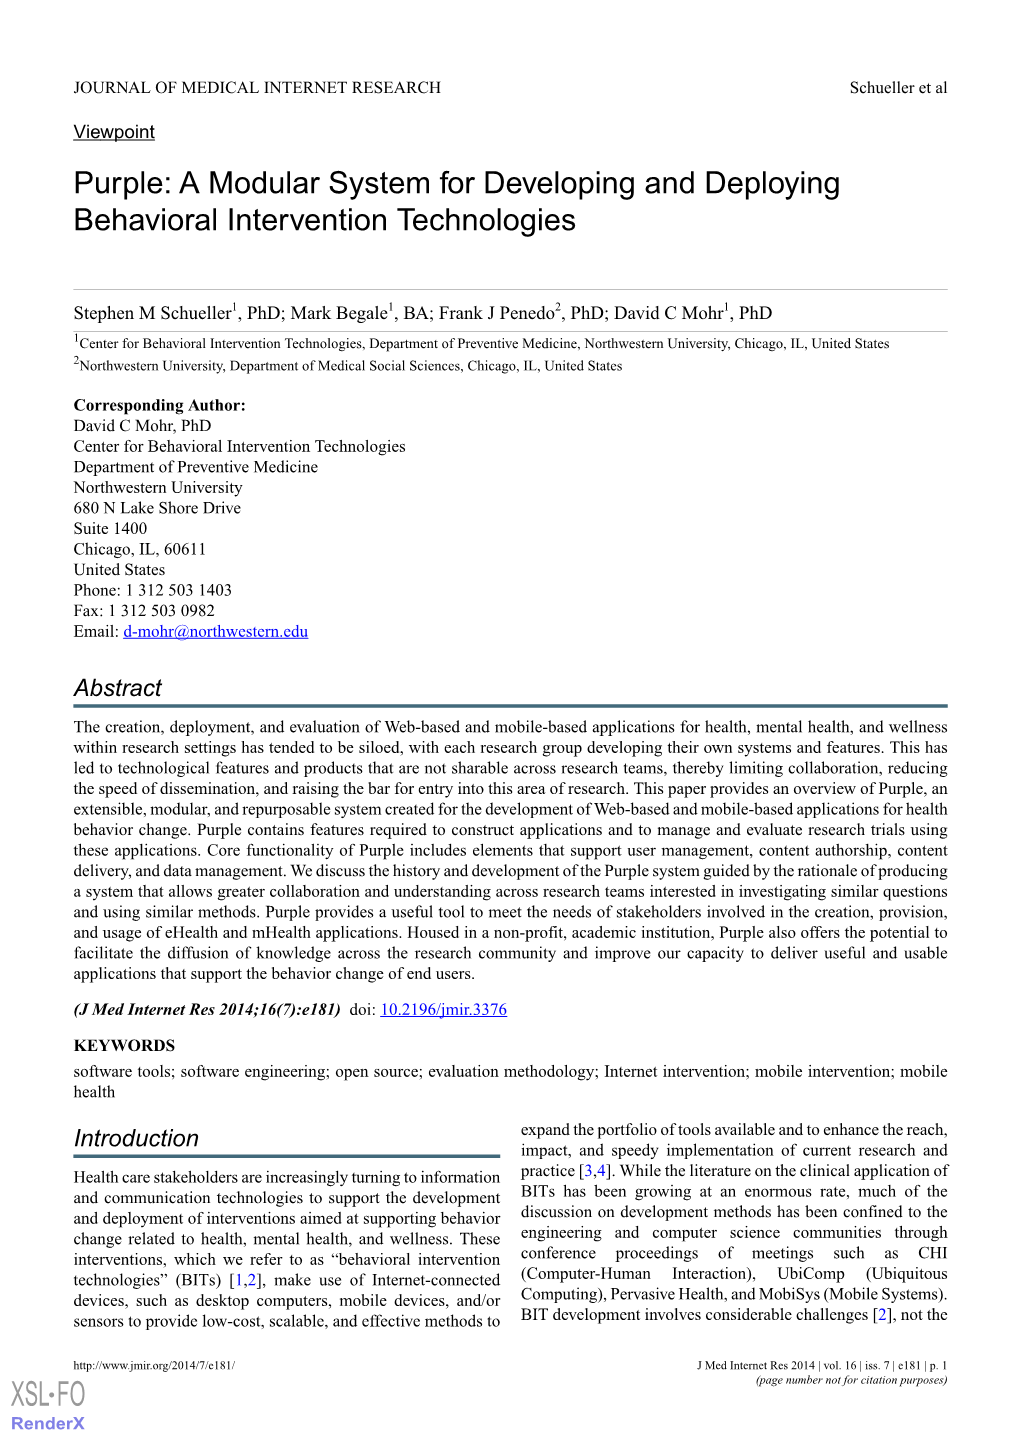 A Modular System for Developing and Deploying Behavioral Intervention Technologies